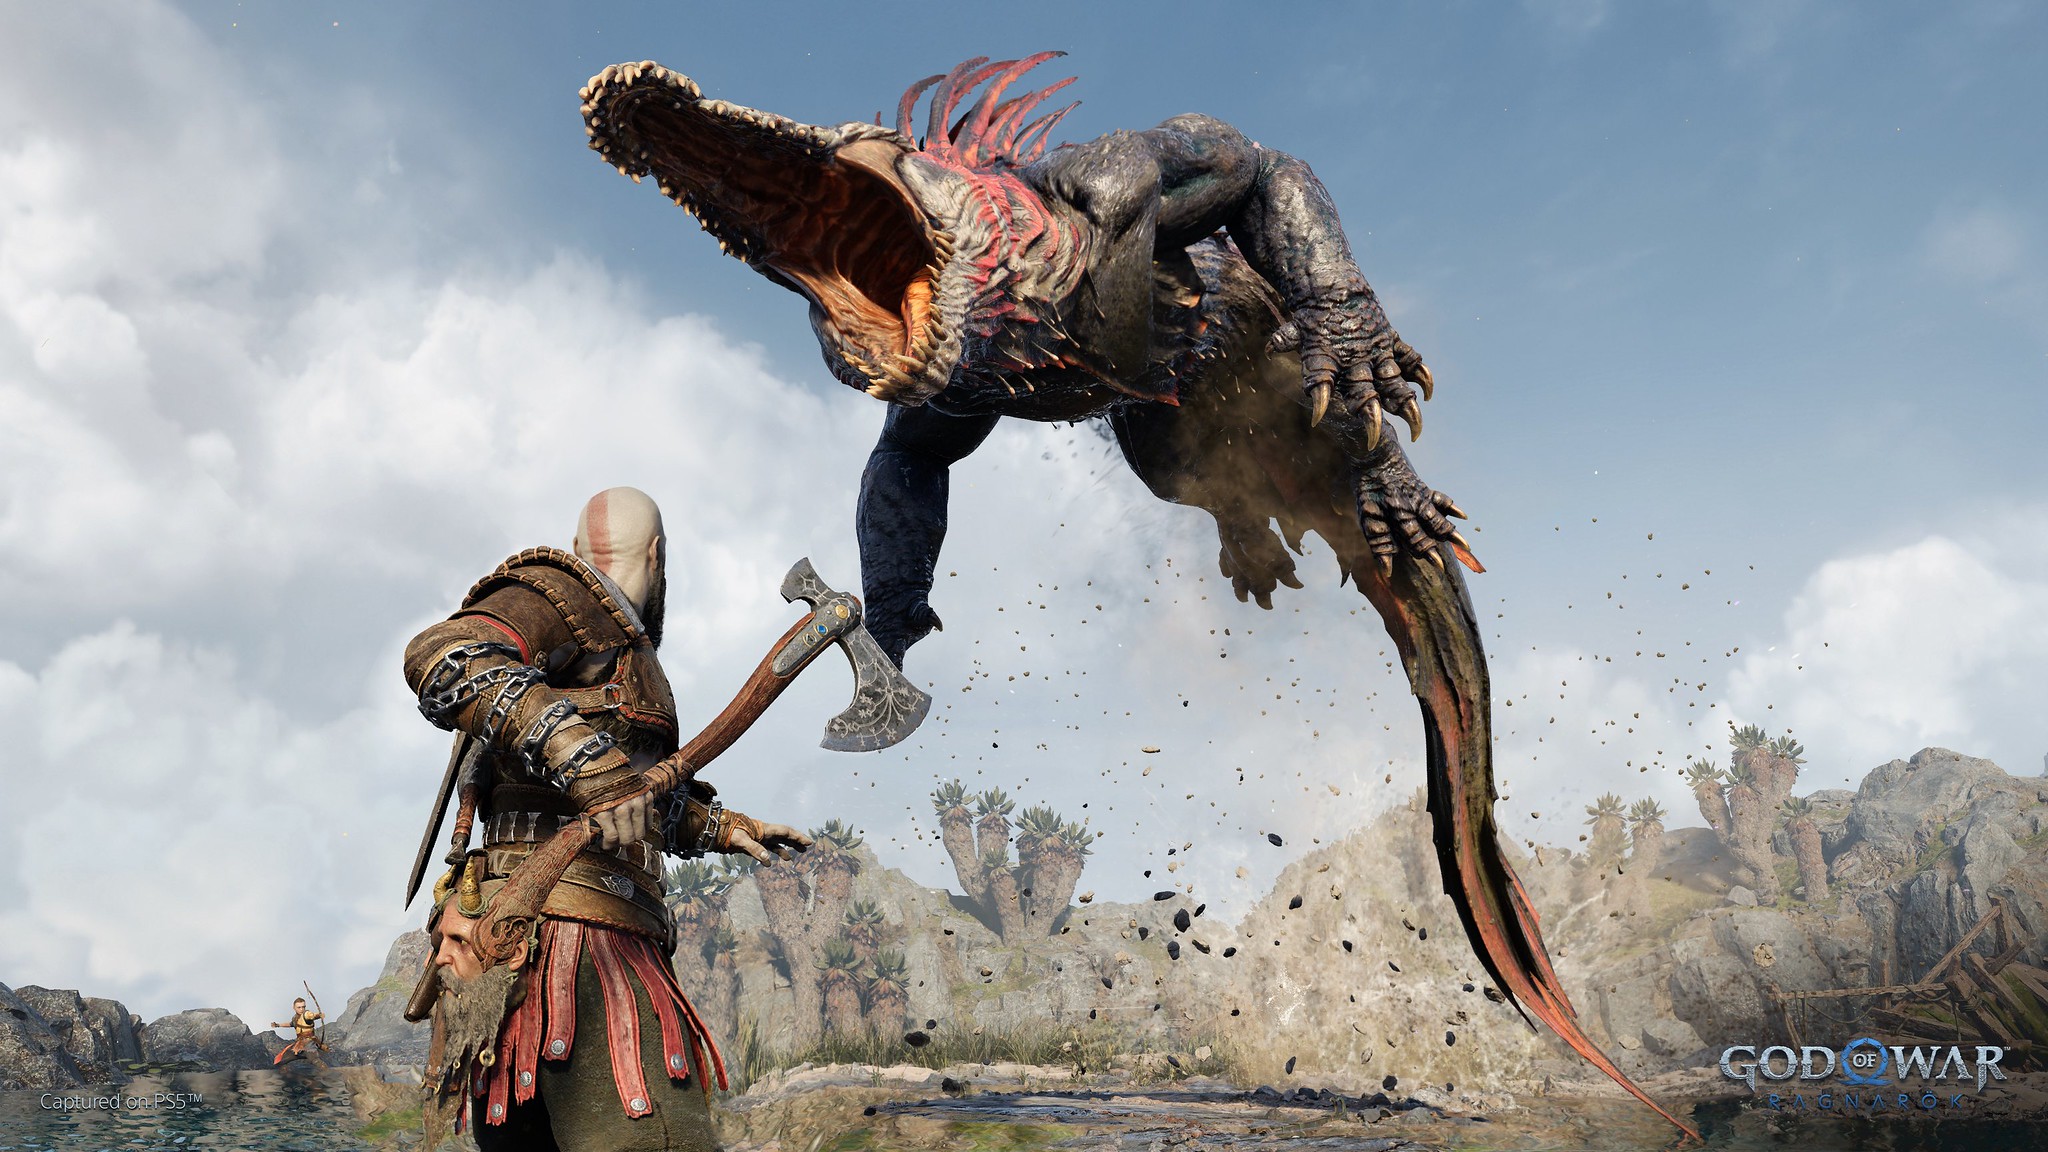 a creature that looks like an alligator attacks Kratos from the air in God of War Ragnarok